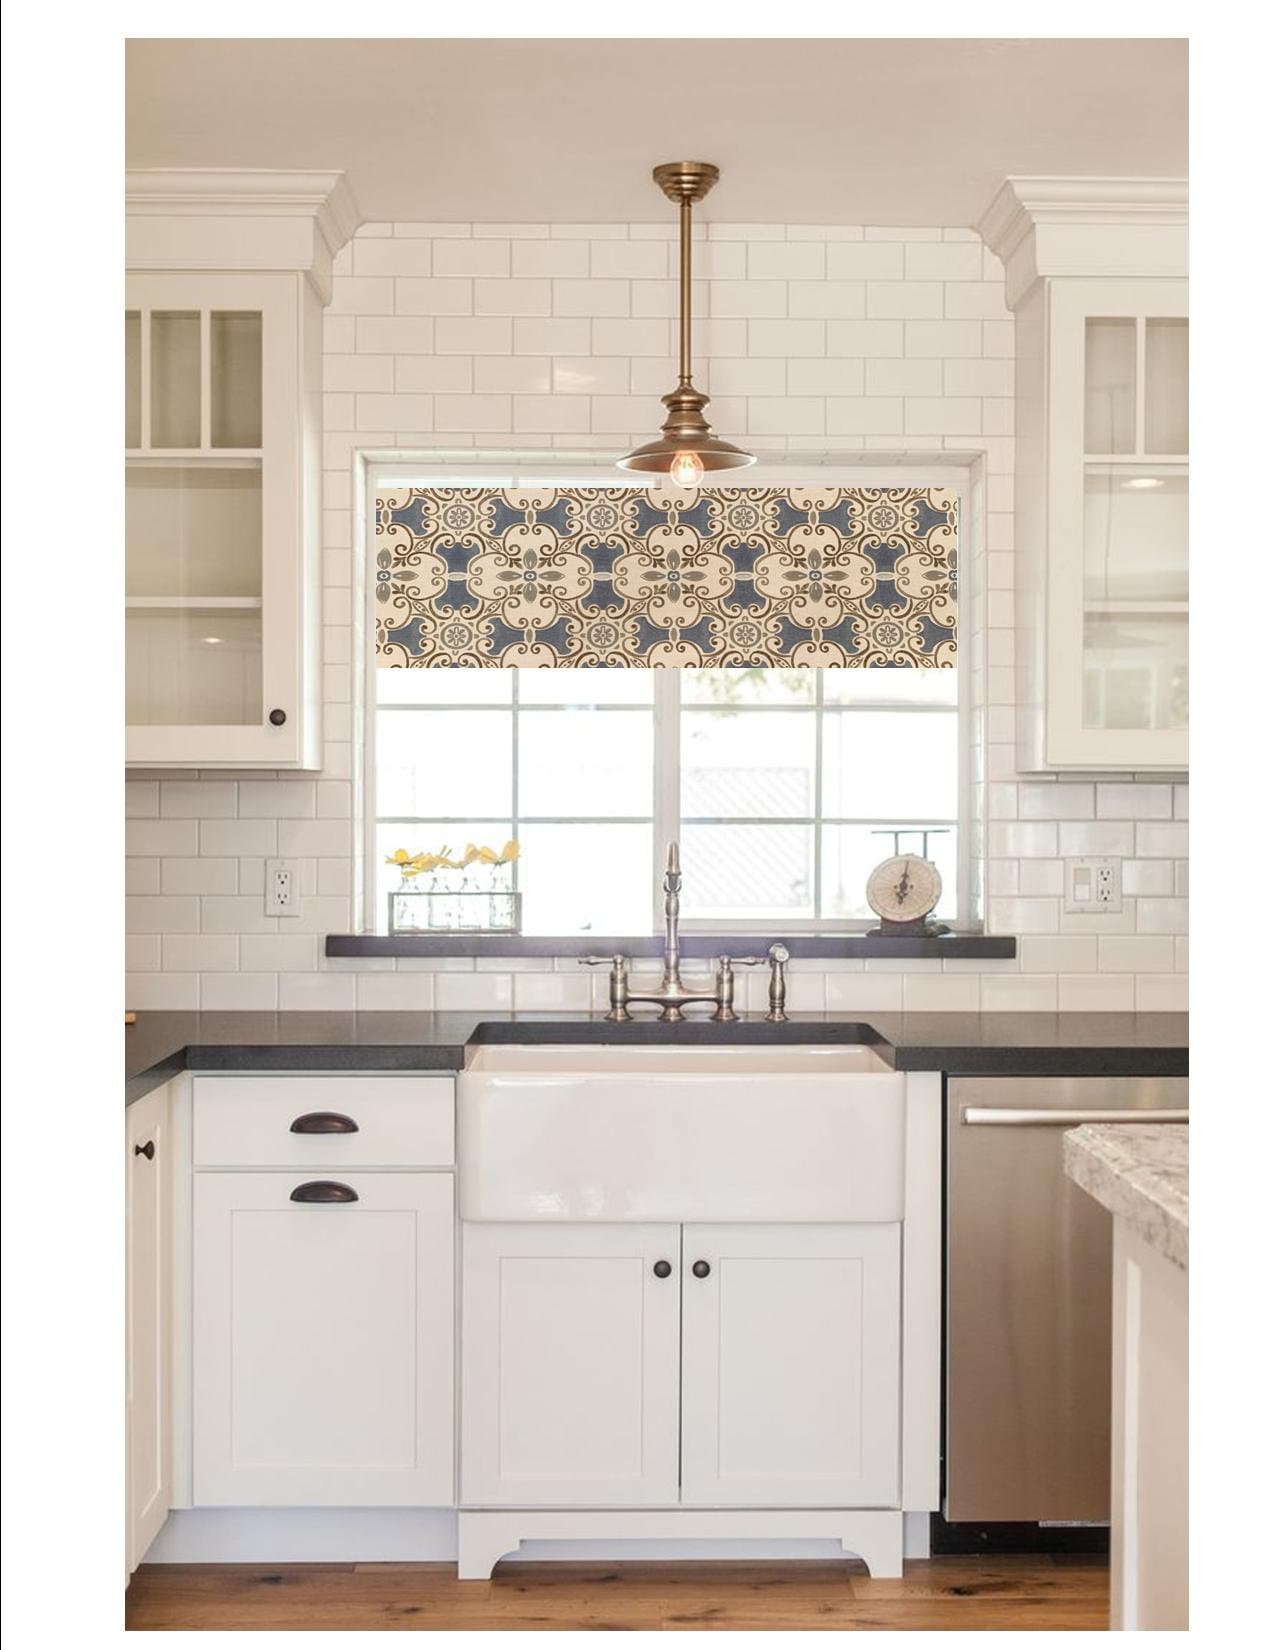 Straight Valance in Blue Spanish Tile Design in Grey and Brown Cotton Linen Fabric , Custom Made, Fully Lined Farmhouse Kitchen Valance